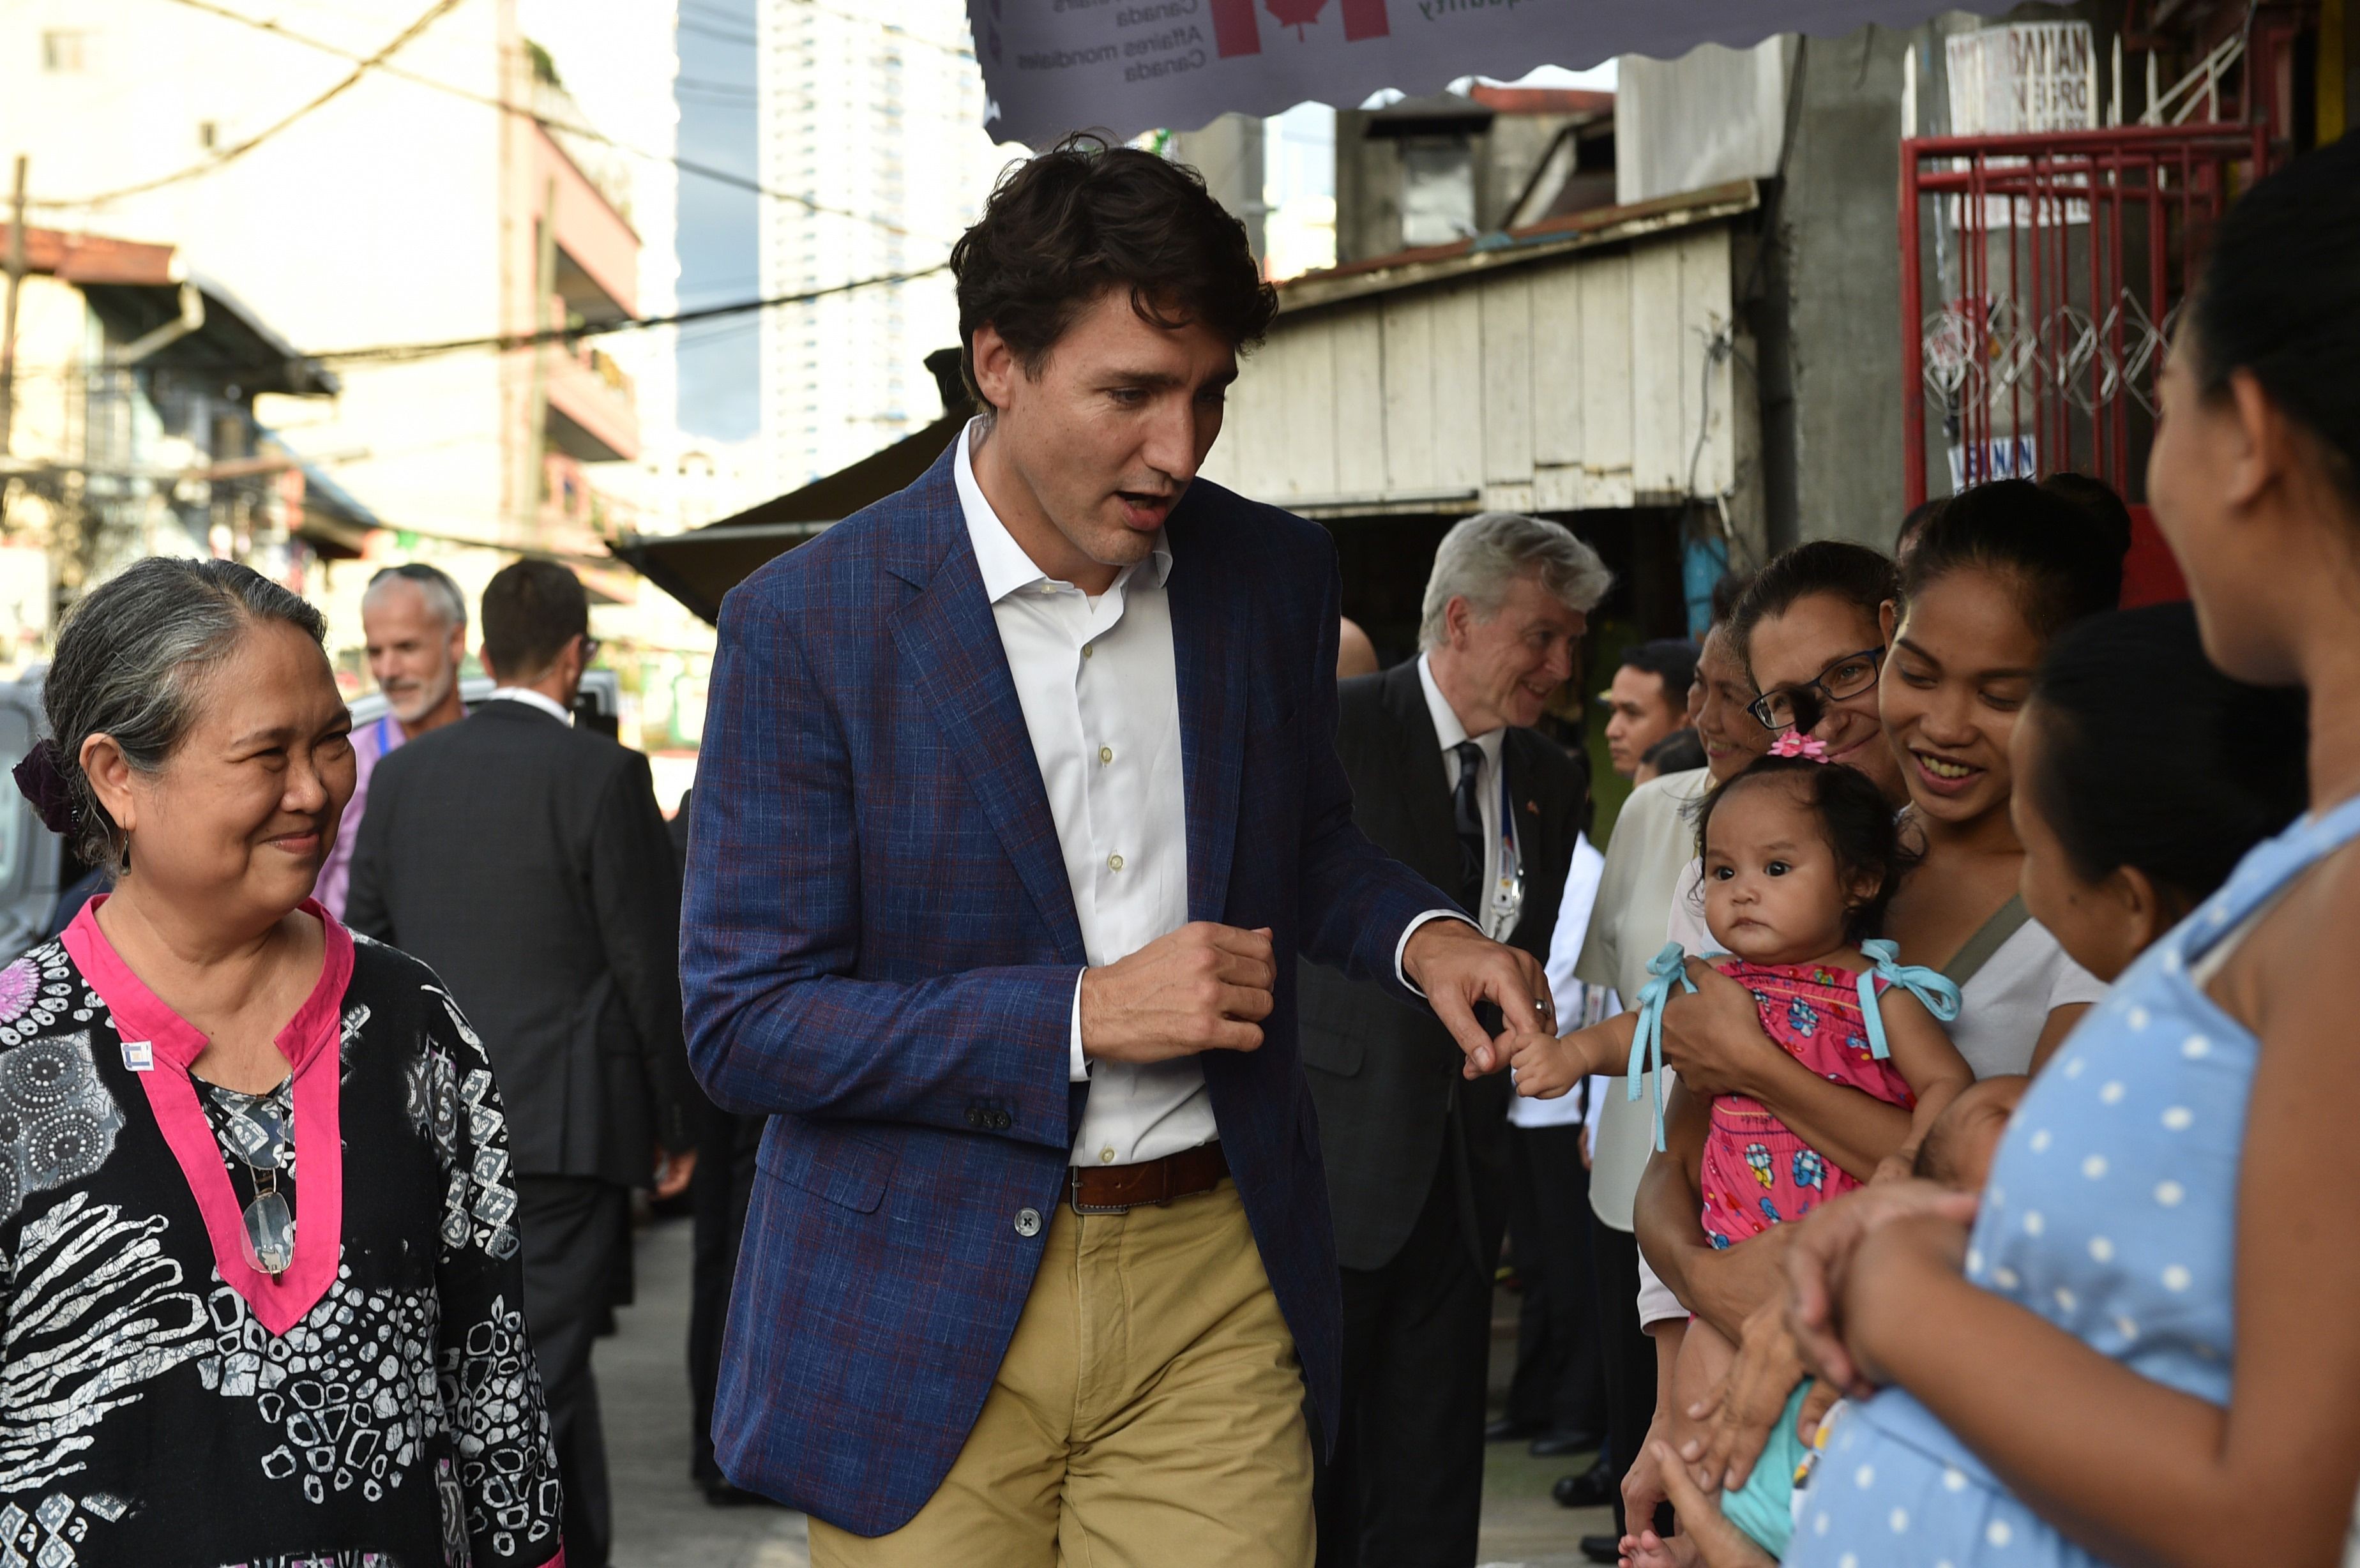 Justin Trudeau and Li Keqiang visit the Bell Centre 